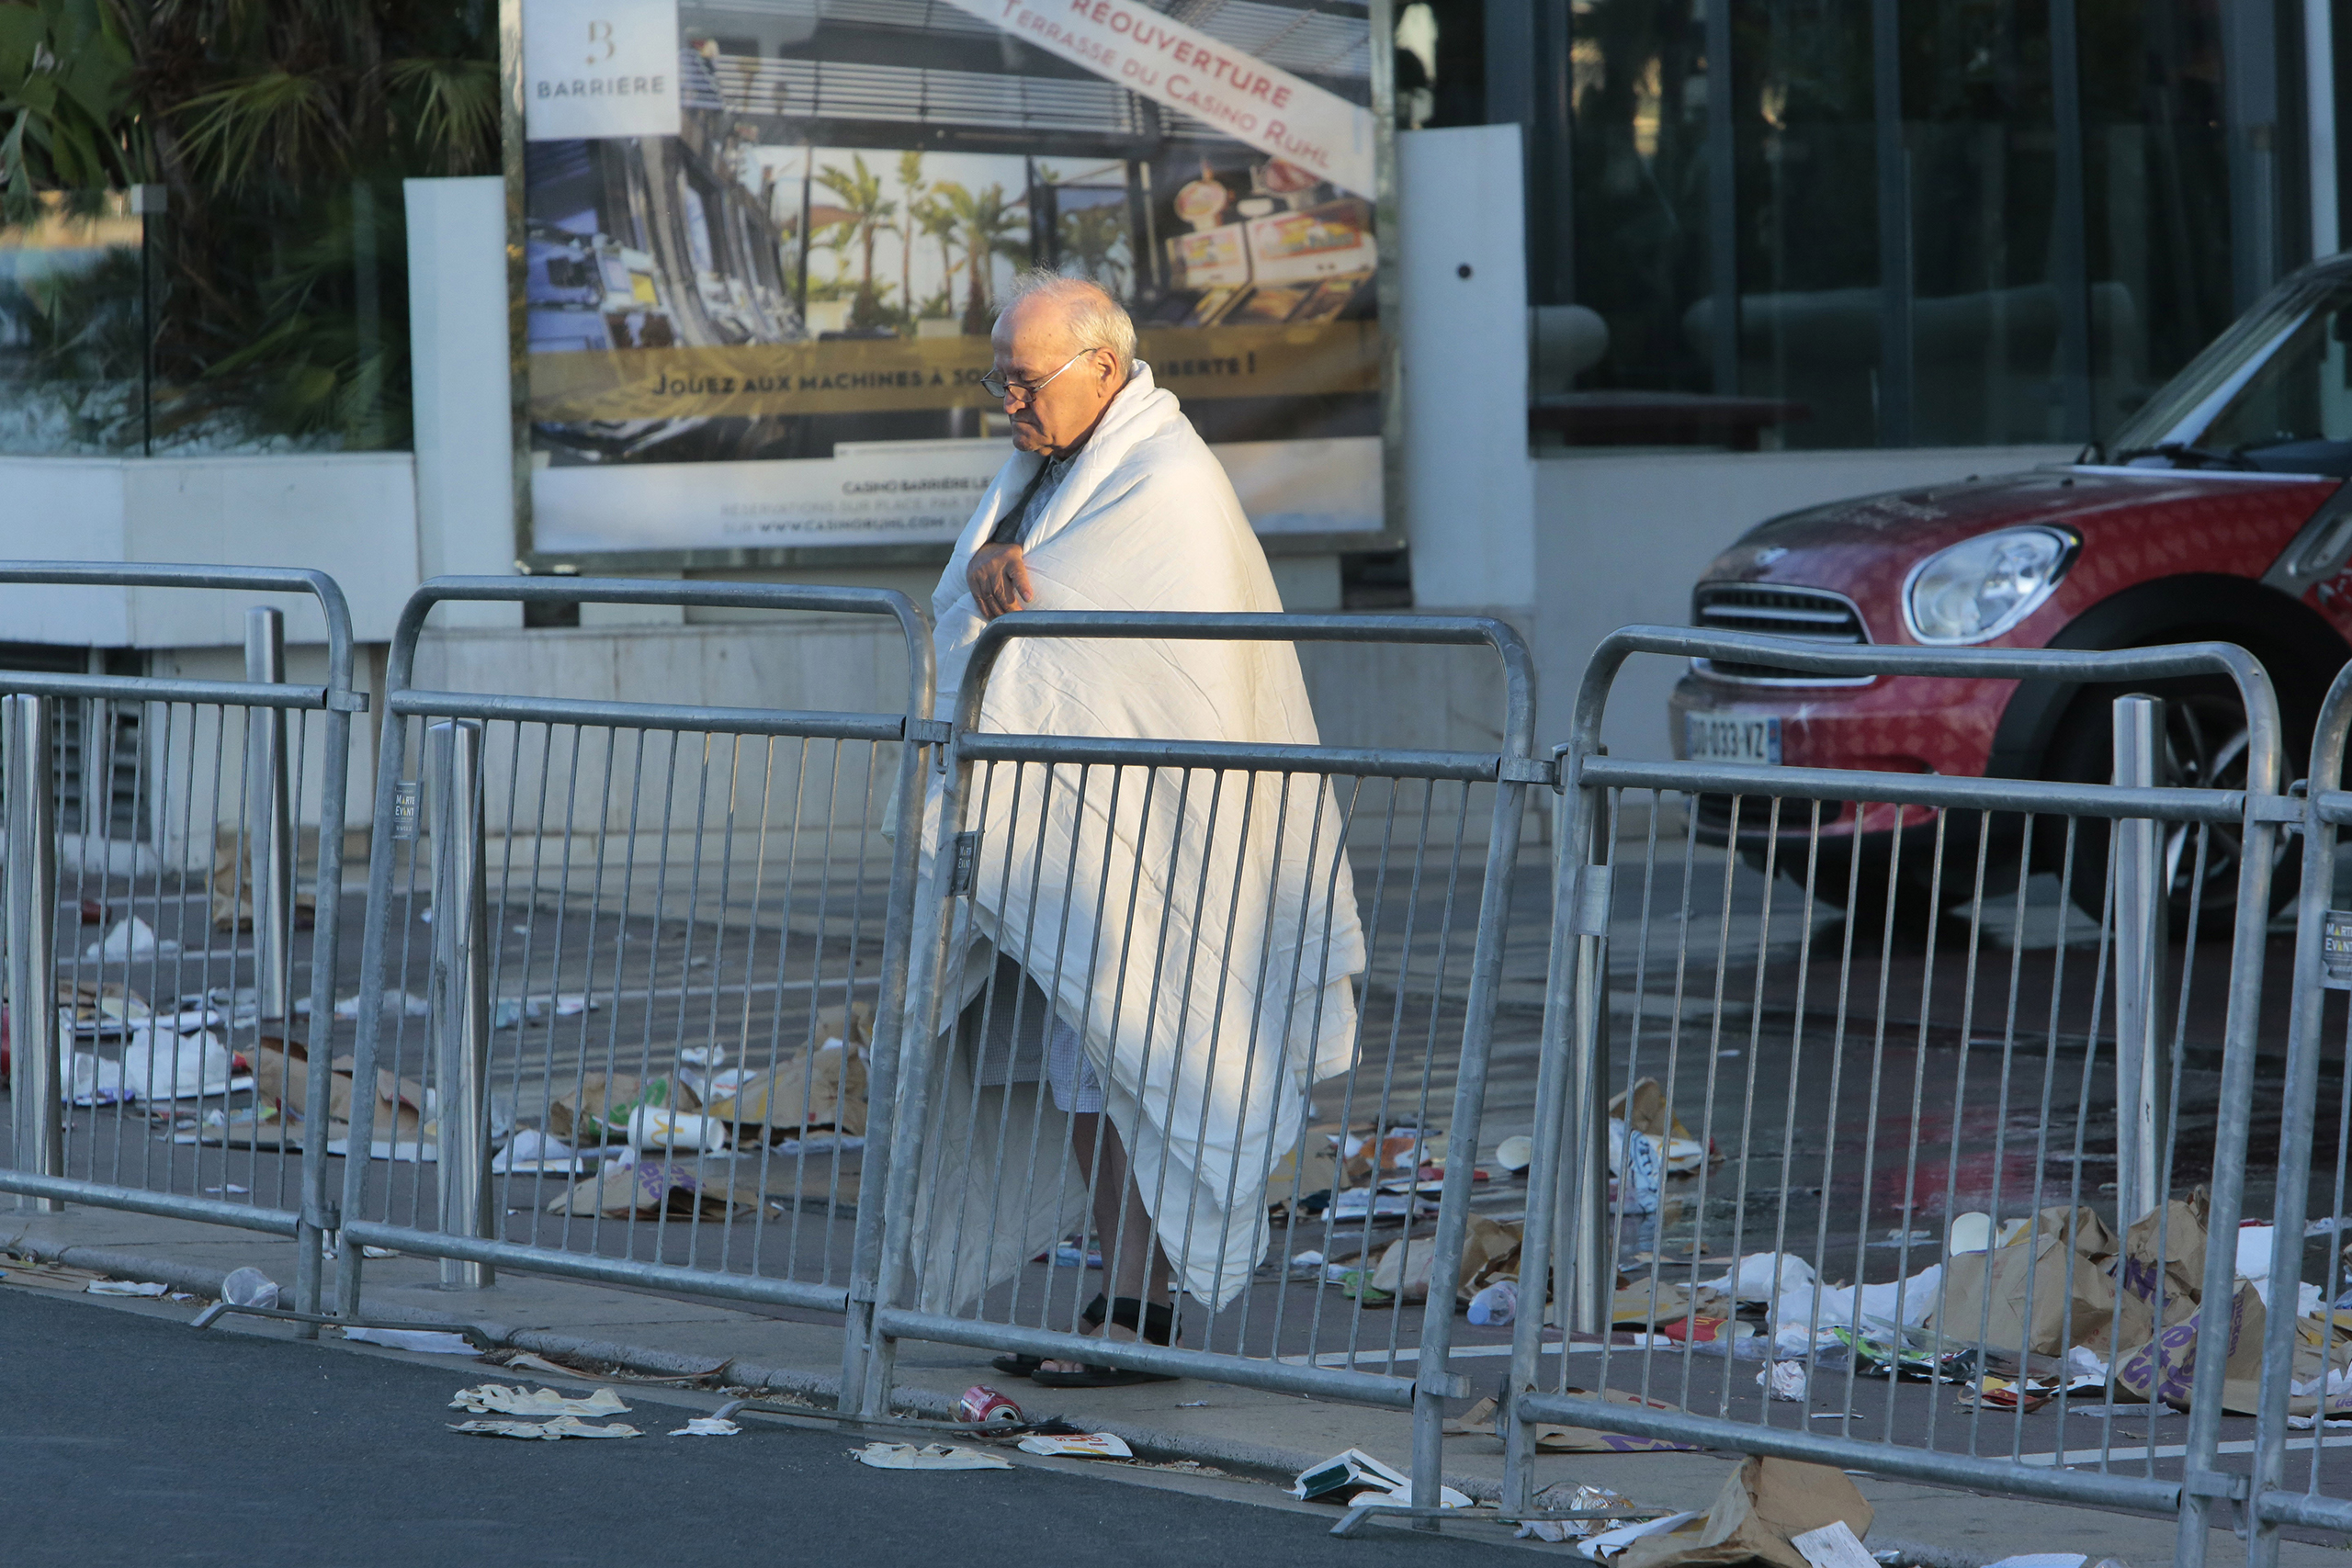 A man at the scene of the truck attack in Nice, France, on July 15, 2016. Authorities said a driver plowed into people celebrating Bastille Day late on Thursday, killing at least 84 people. (Patrick Aventurier—Getty Images)